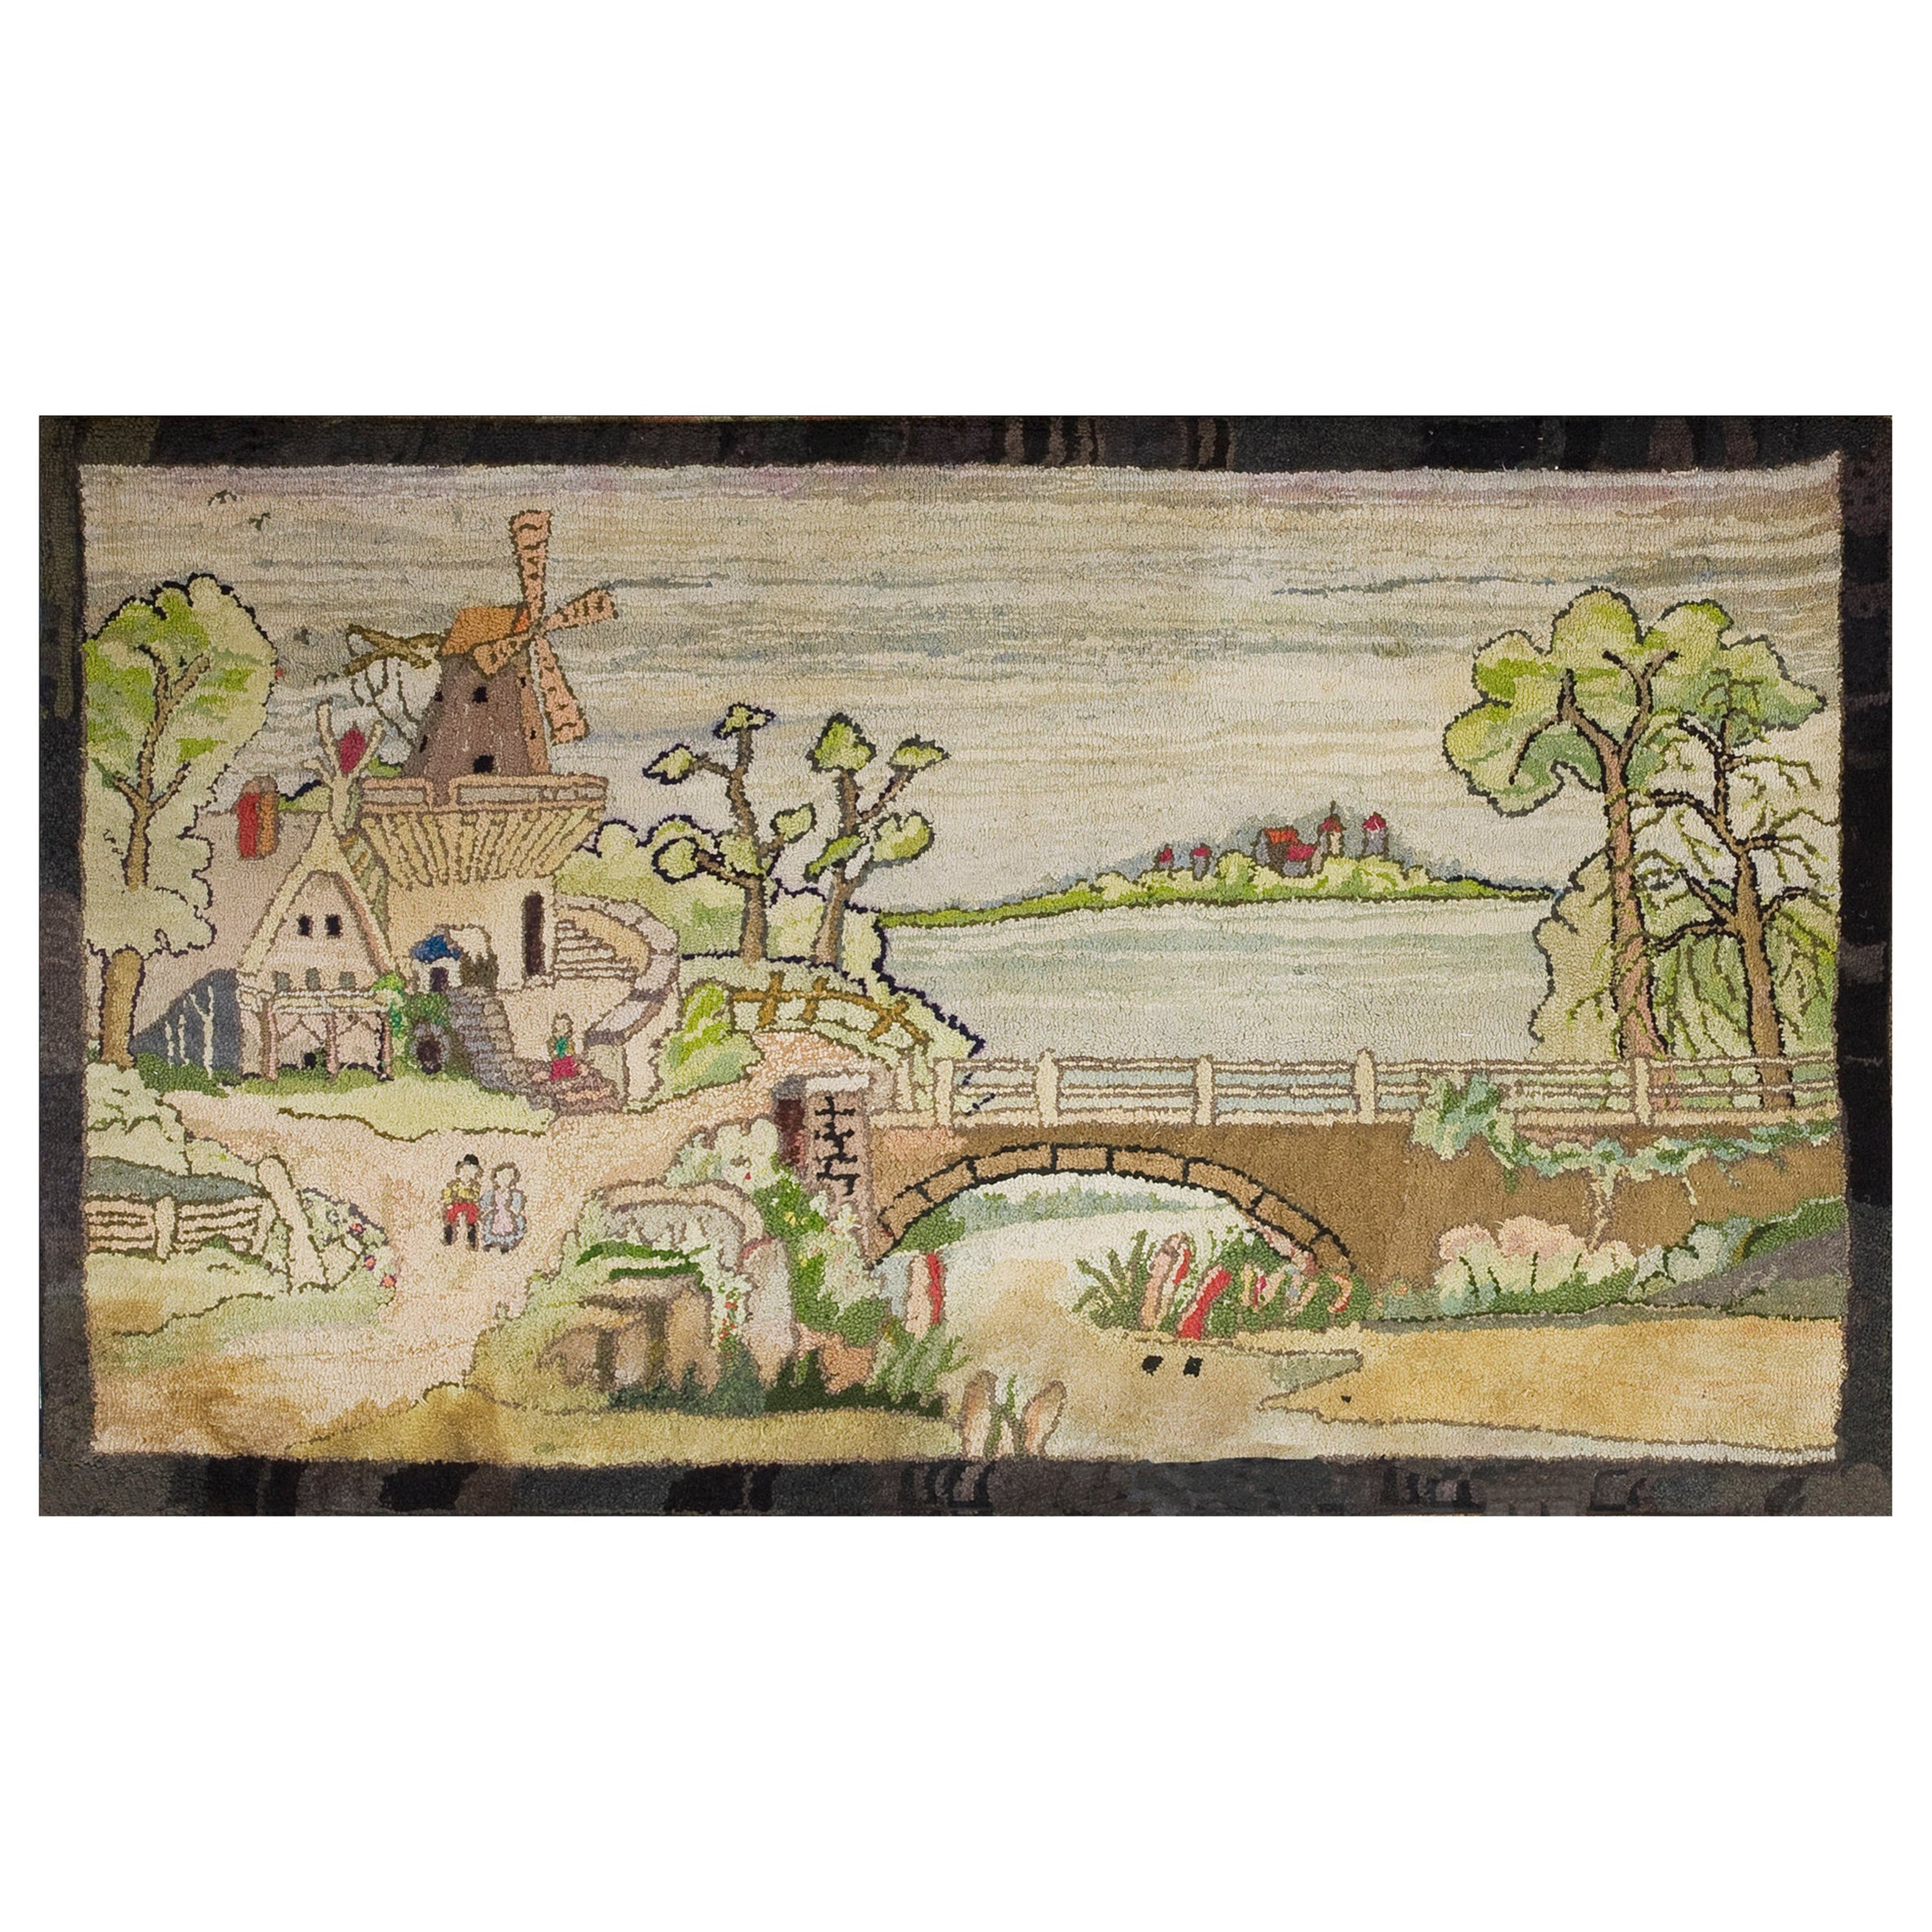 Mid 20th Century Pictorial American Hooked Rug ( 3'2" x 5'6" - 97 x 168 )